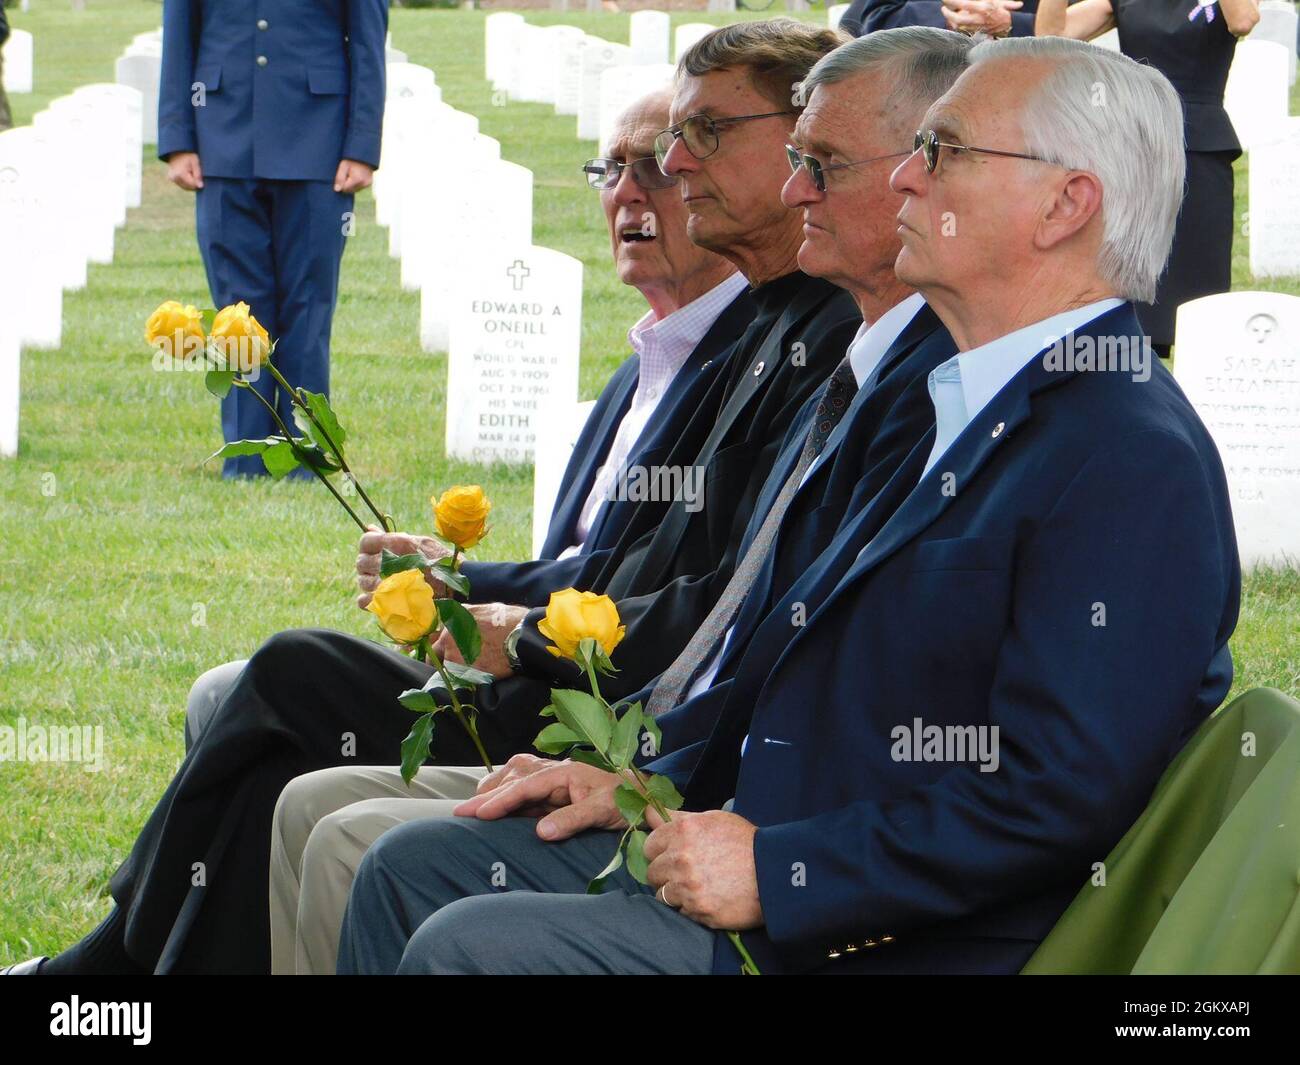 The four sons of Major Harvey Storms listen to a graveside service for their father who was buried in Arlington National Cemetery on July 16, 2021. Major Storms was reported missing in action on Dec. 1, 1950, when his unit was attacked by enemy forces near the Chosin Reservoir, North Korea. Following the battle, his remains could not be recovered. The Defense POW/MIA Accounting Agency was able to identify the remains in 2019. (Defense Photo by Ashley M. Wright) Stock Photo